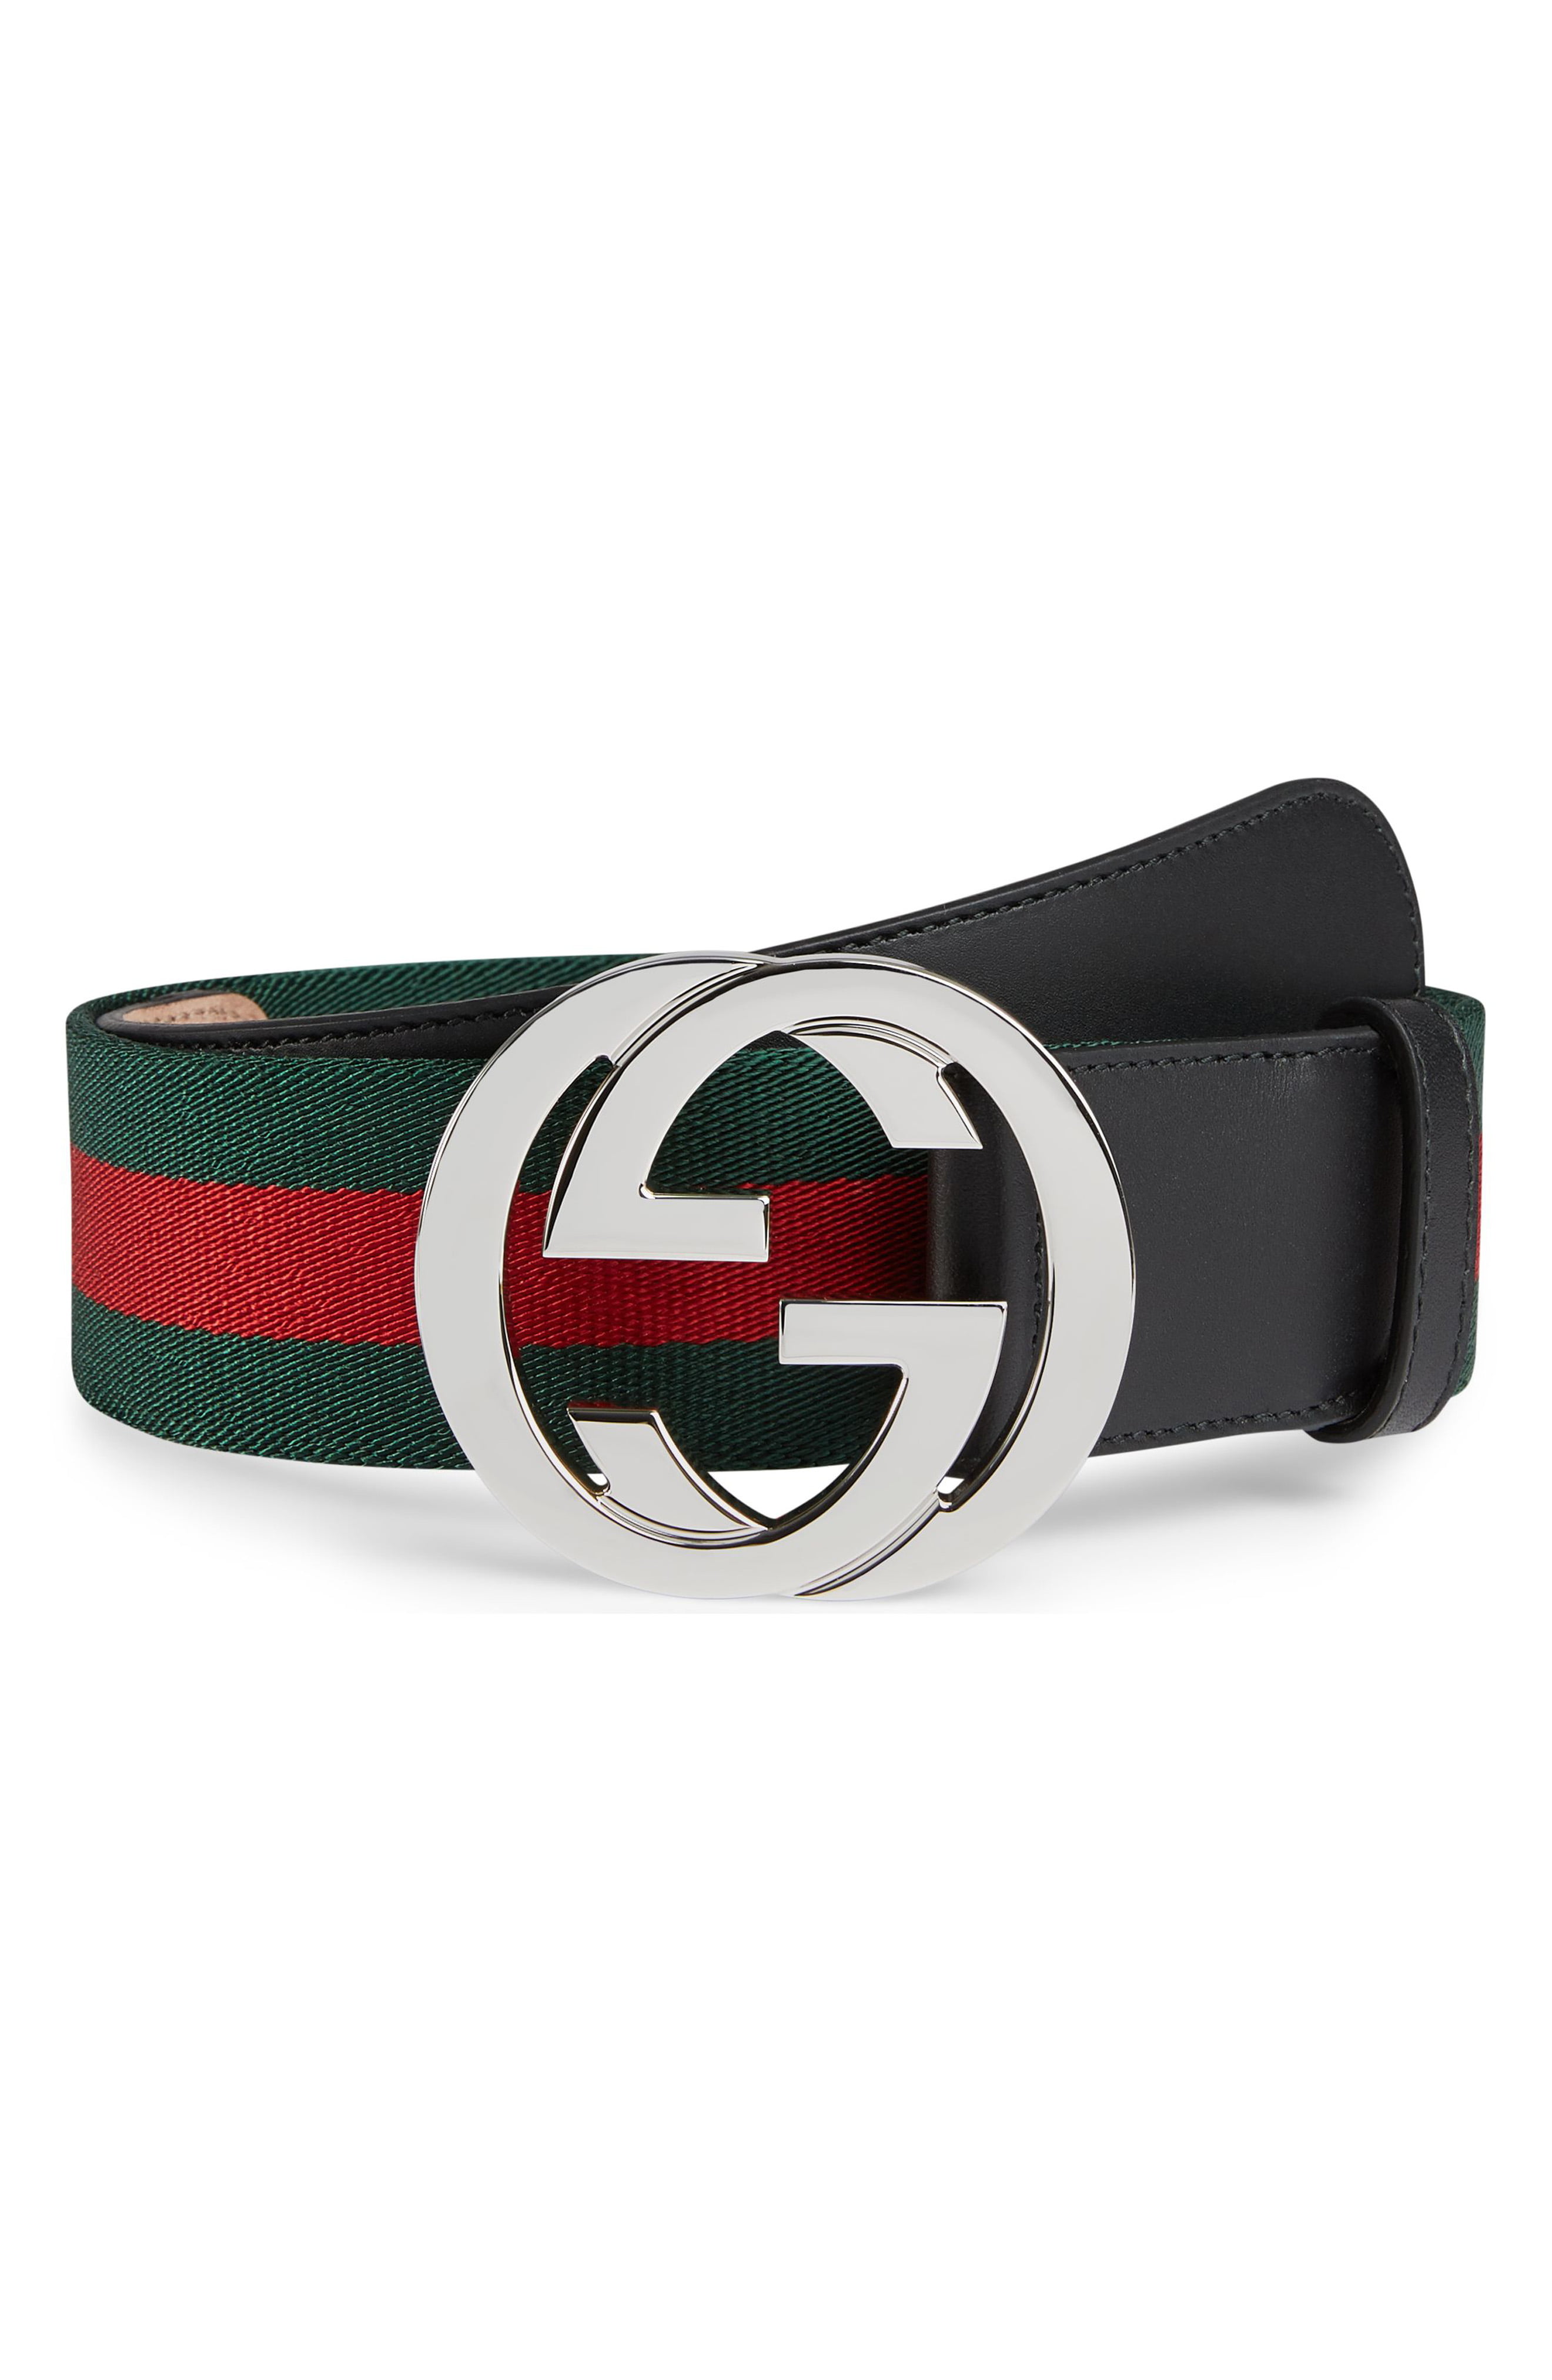 gucci belt real price